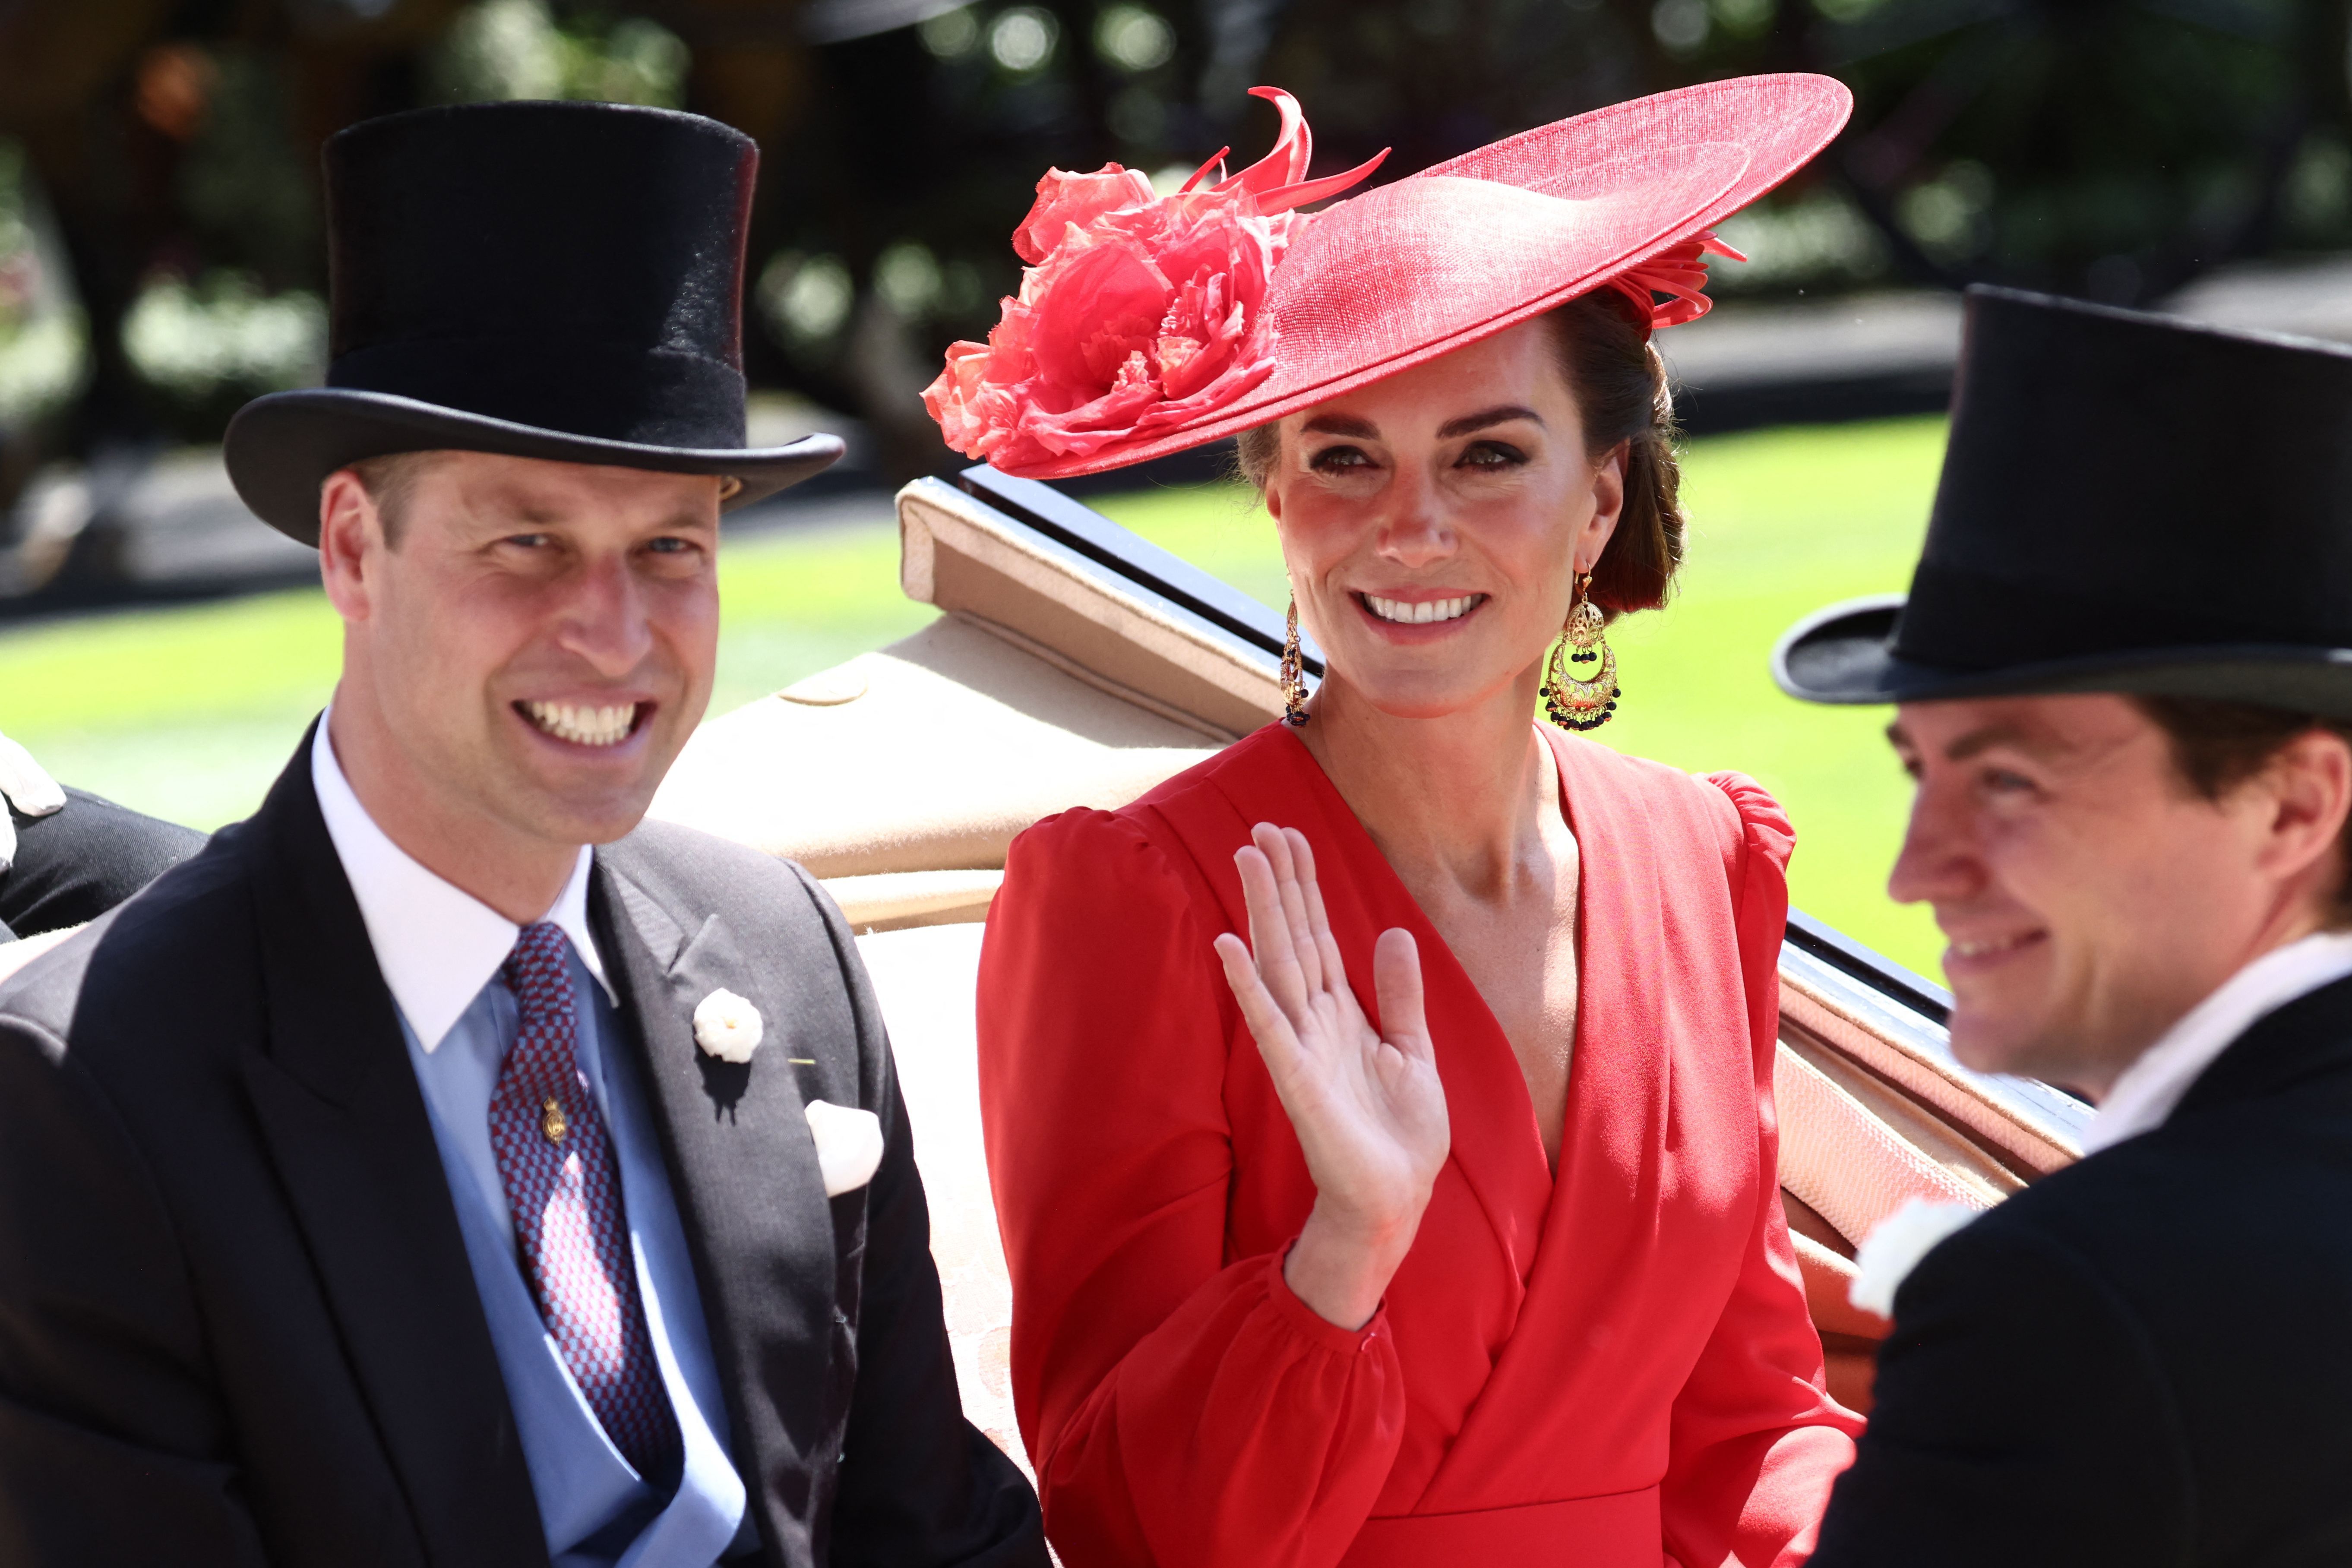 Kate Middleton's Latest Look: A Little Red Dress by Alexander